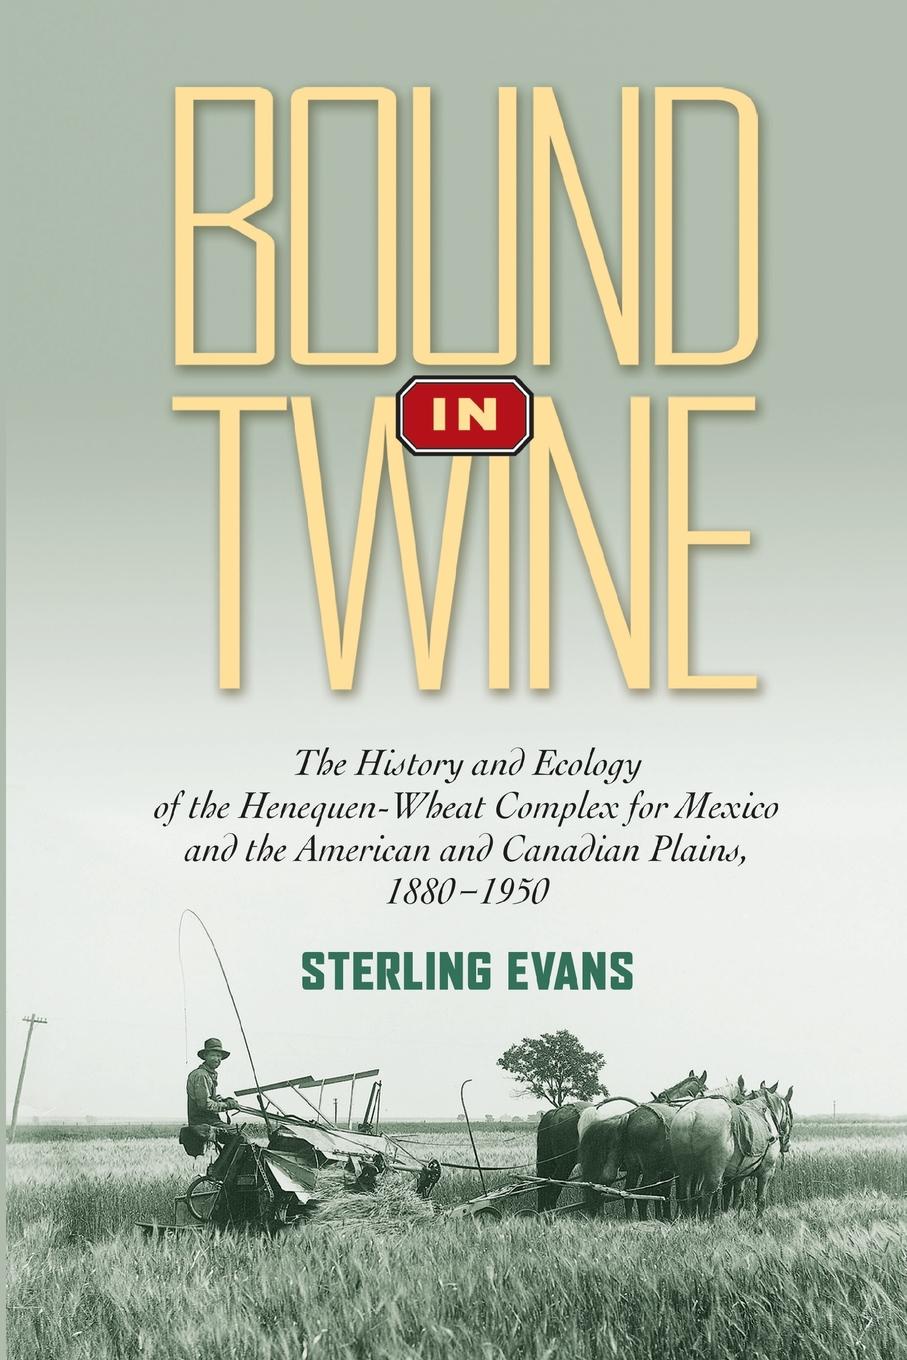 Bound in Twine. The History and Ecology of the Henequen-Wheat Complex for Mexico and the American and Canadian Plains, 1880-1950